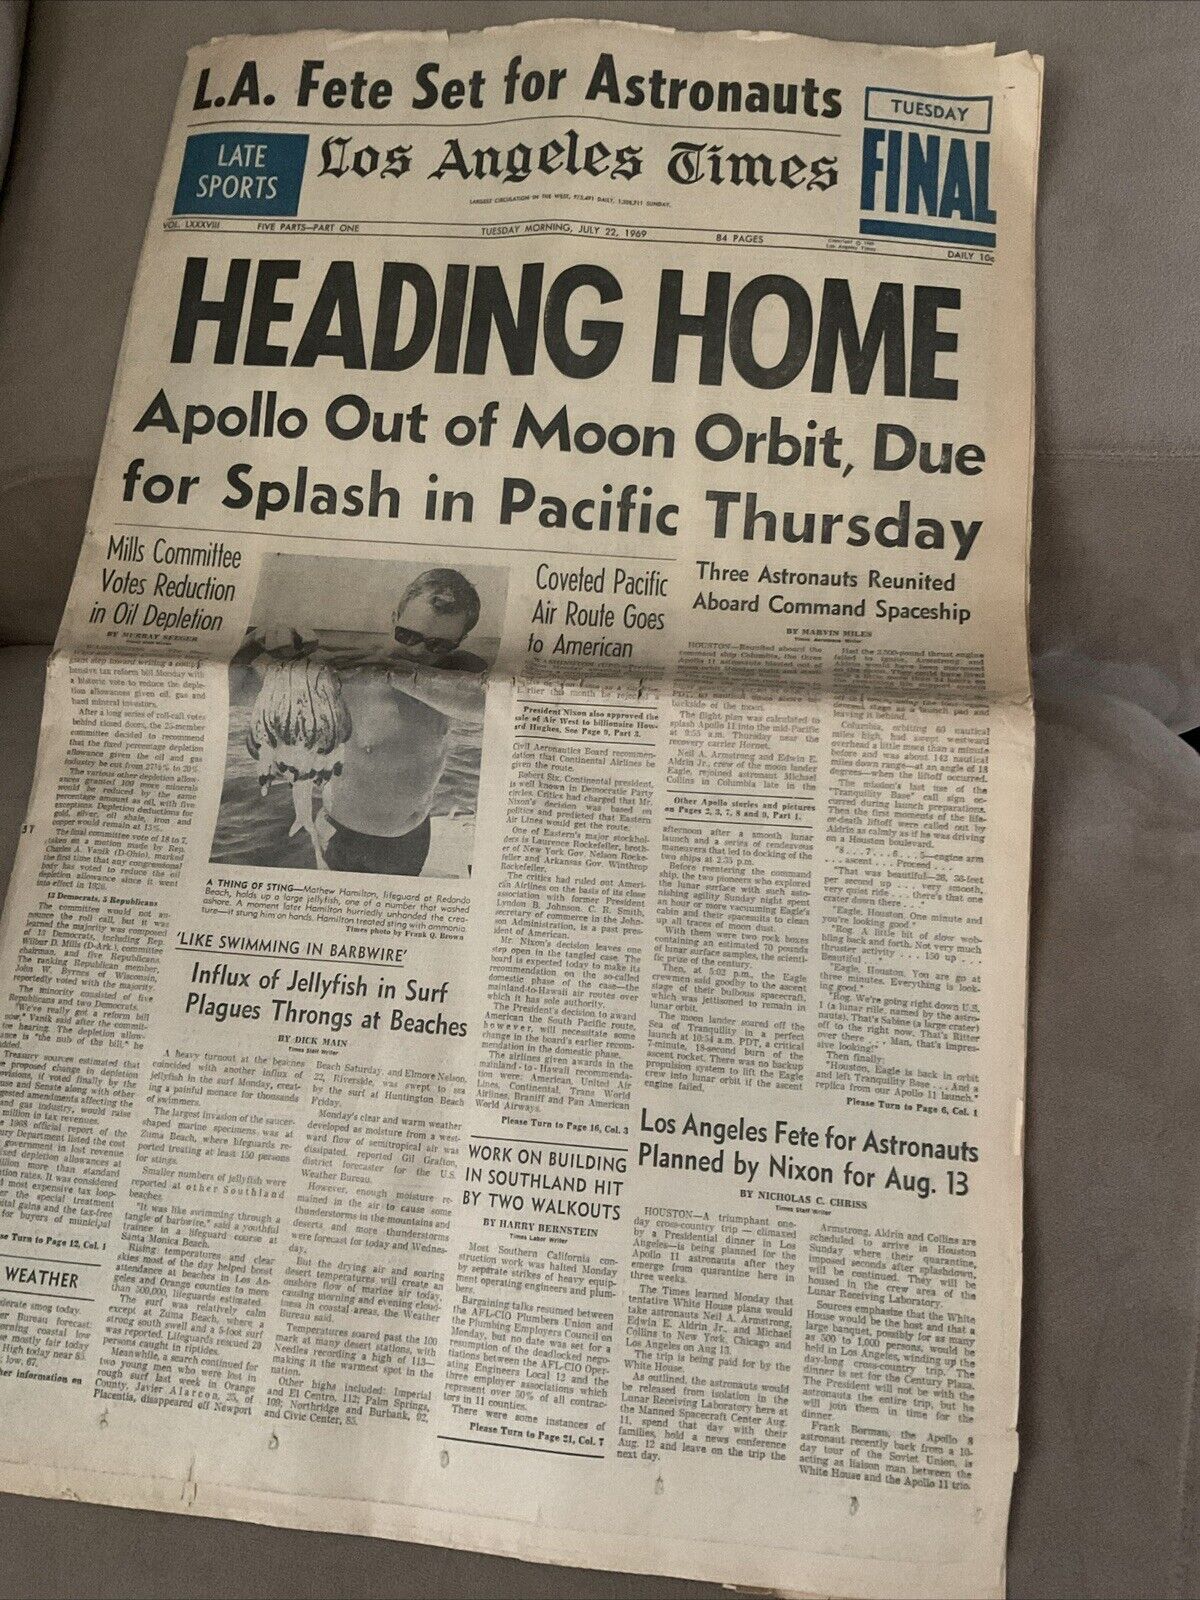 Apollo 11 Heading Home. L.A. Times, July 22, 1969 - Newspaper